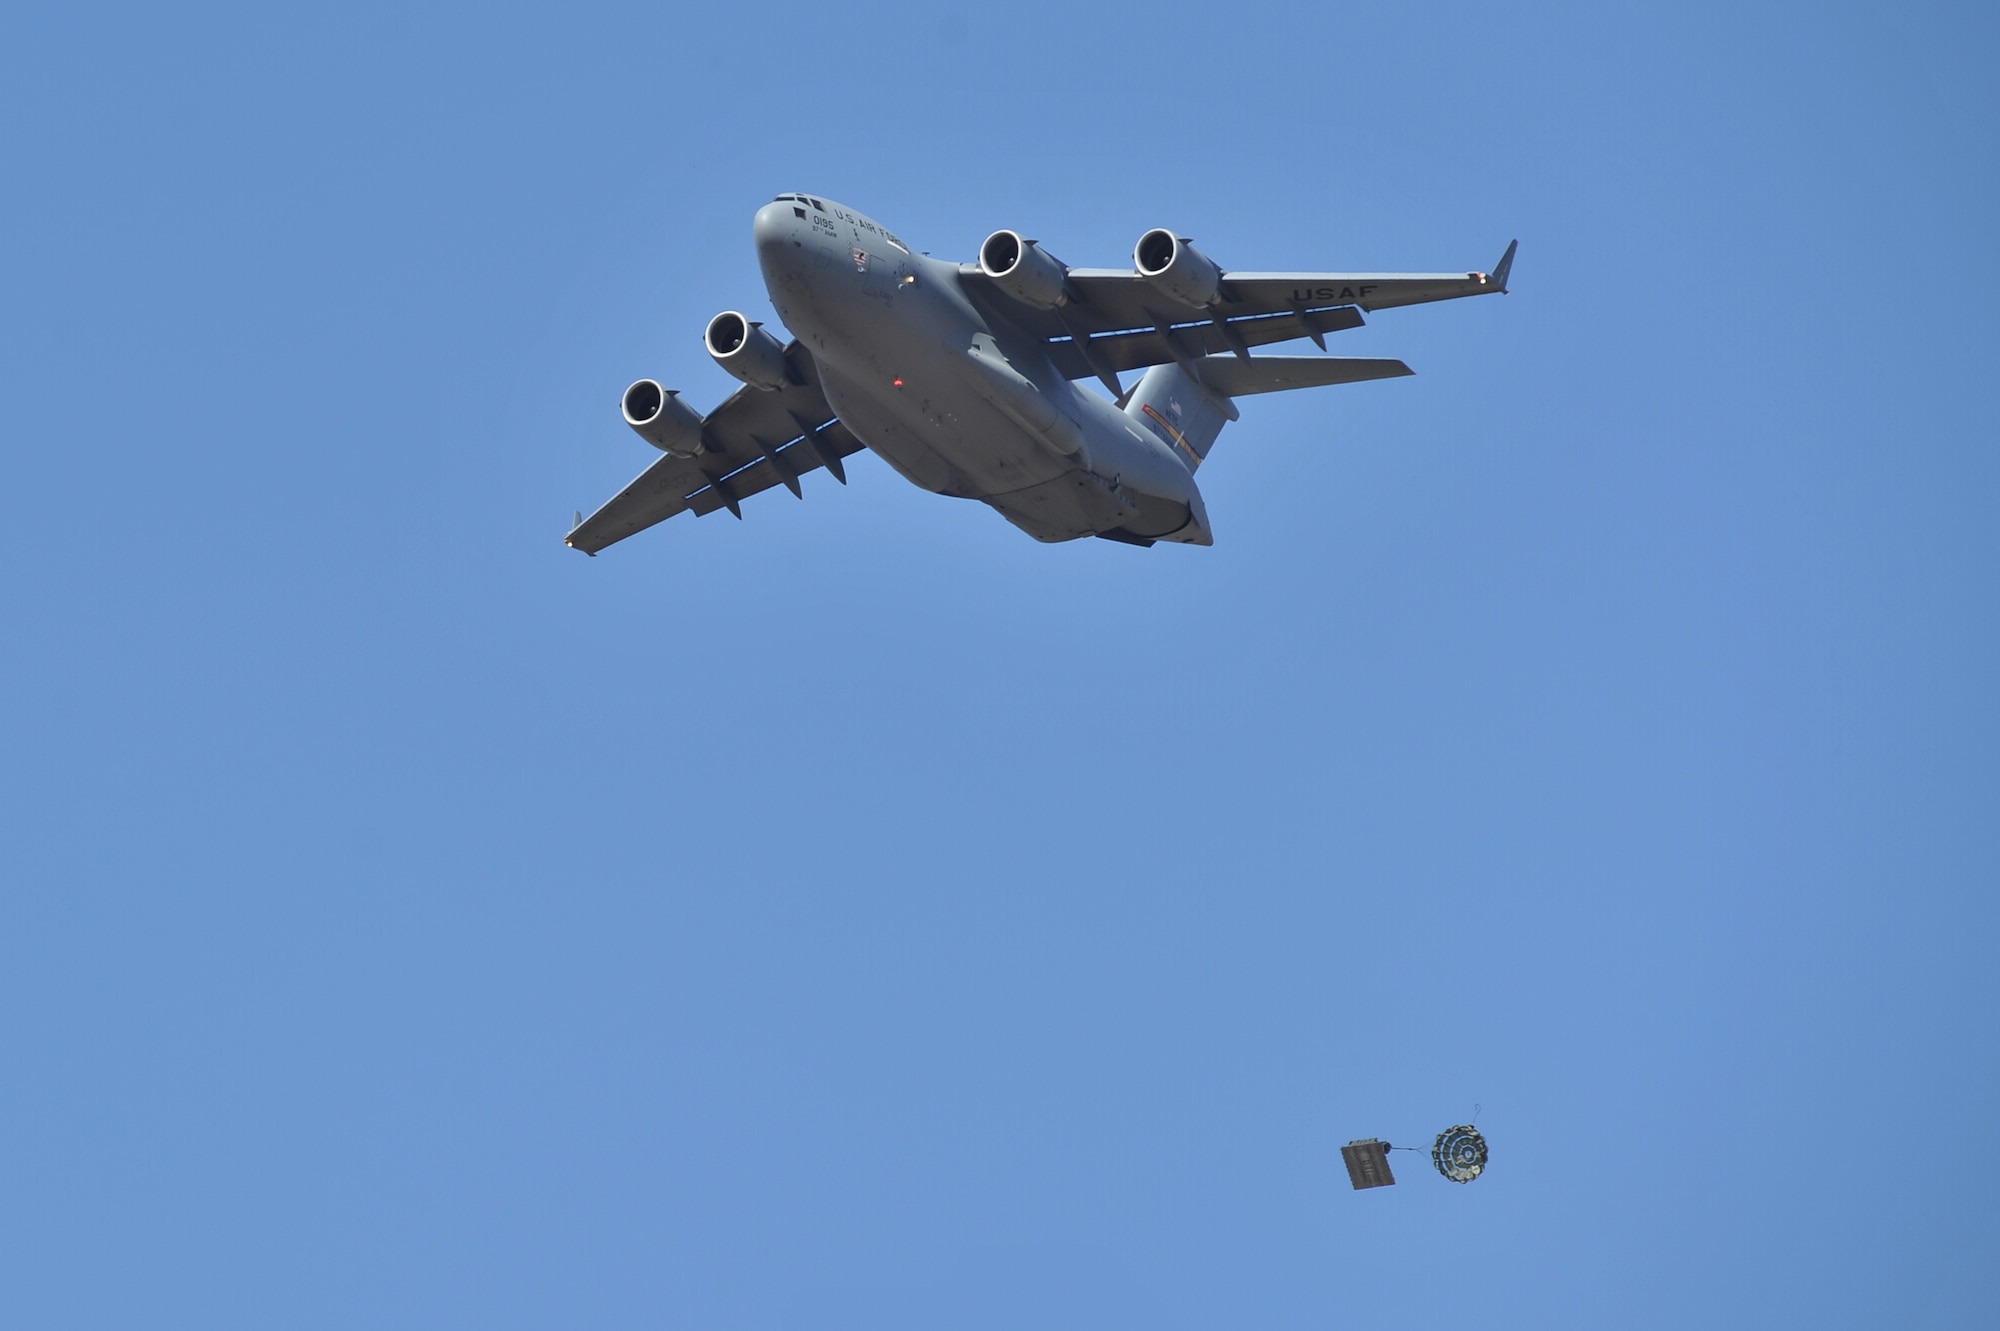 HOLLIS, Okla. – A U.S. Air Force C-17 Globemaster III cargo aircraft drops a cargo pallet during an airdrop training mission Oct. 30, 3014. The 58th Airlift Squadron, from Altus Air Force Base, performs airdrop training missions to ensure that the loadmasters-in-training are fully qualified to perform real-world contingency and humanitarian missions worldwide. (U.S. Air Force Photo by Senior Airman Dillon Davis/Released)